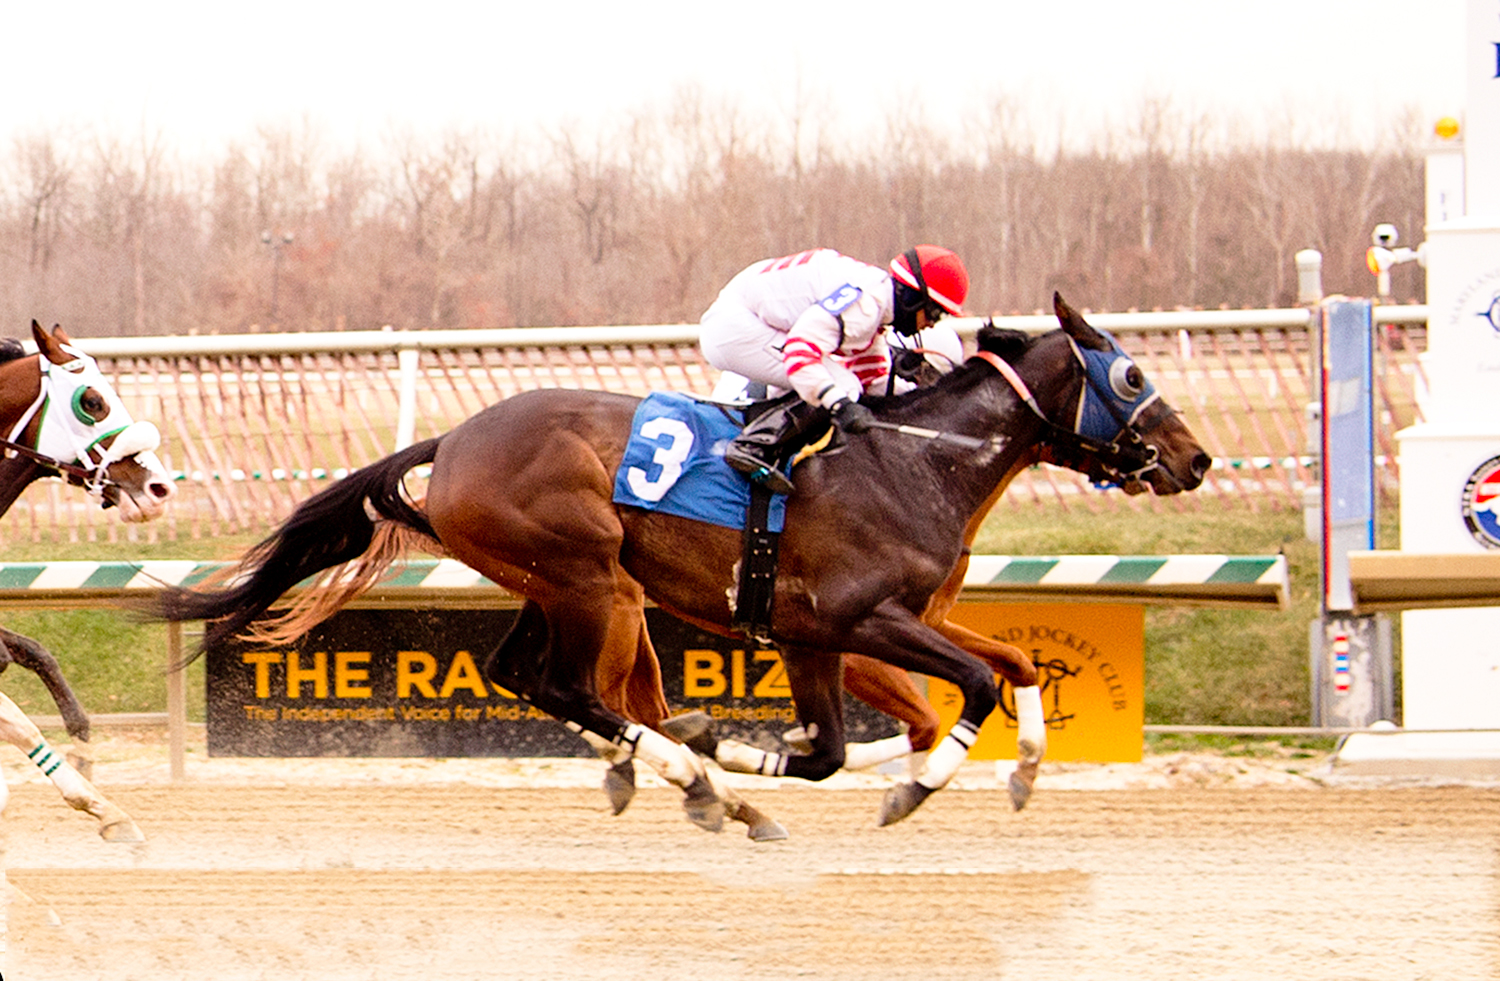 Bourbon and Beer was the best of 10 horses in a maiden claimer at Laurel December 16th. Photo by Jim McCue.